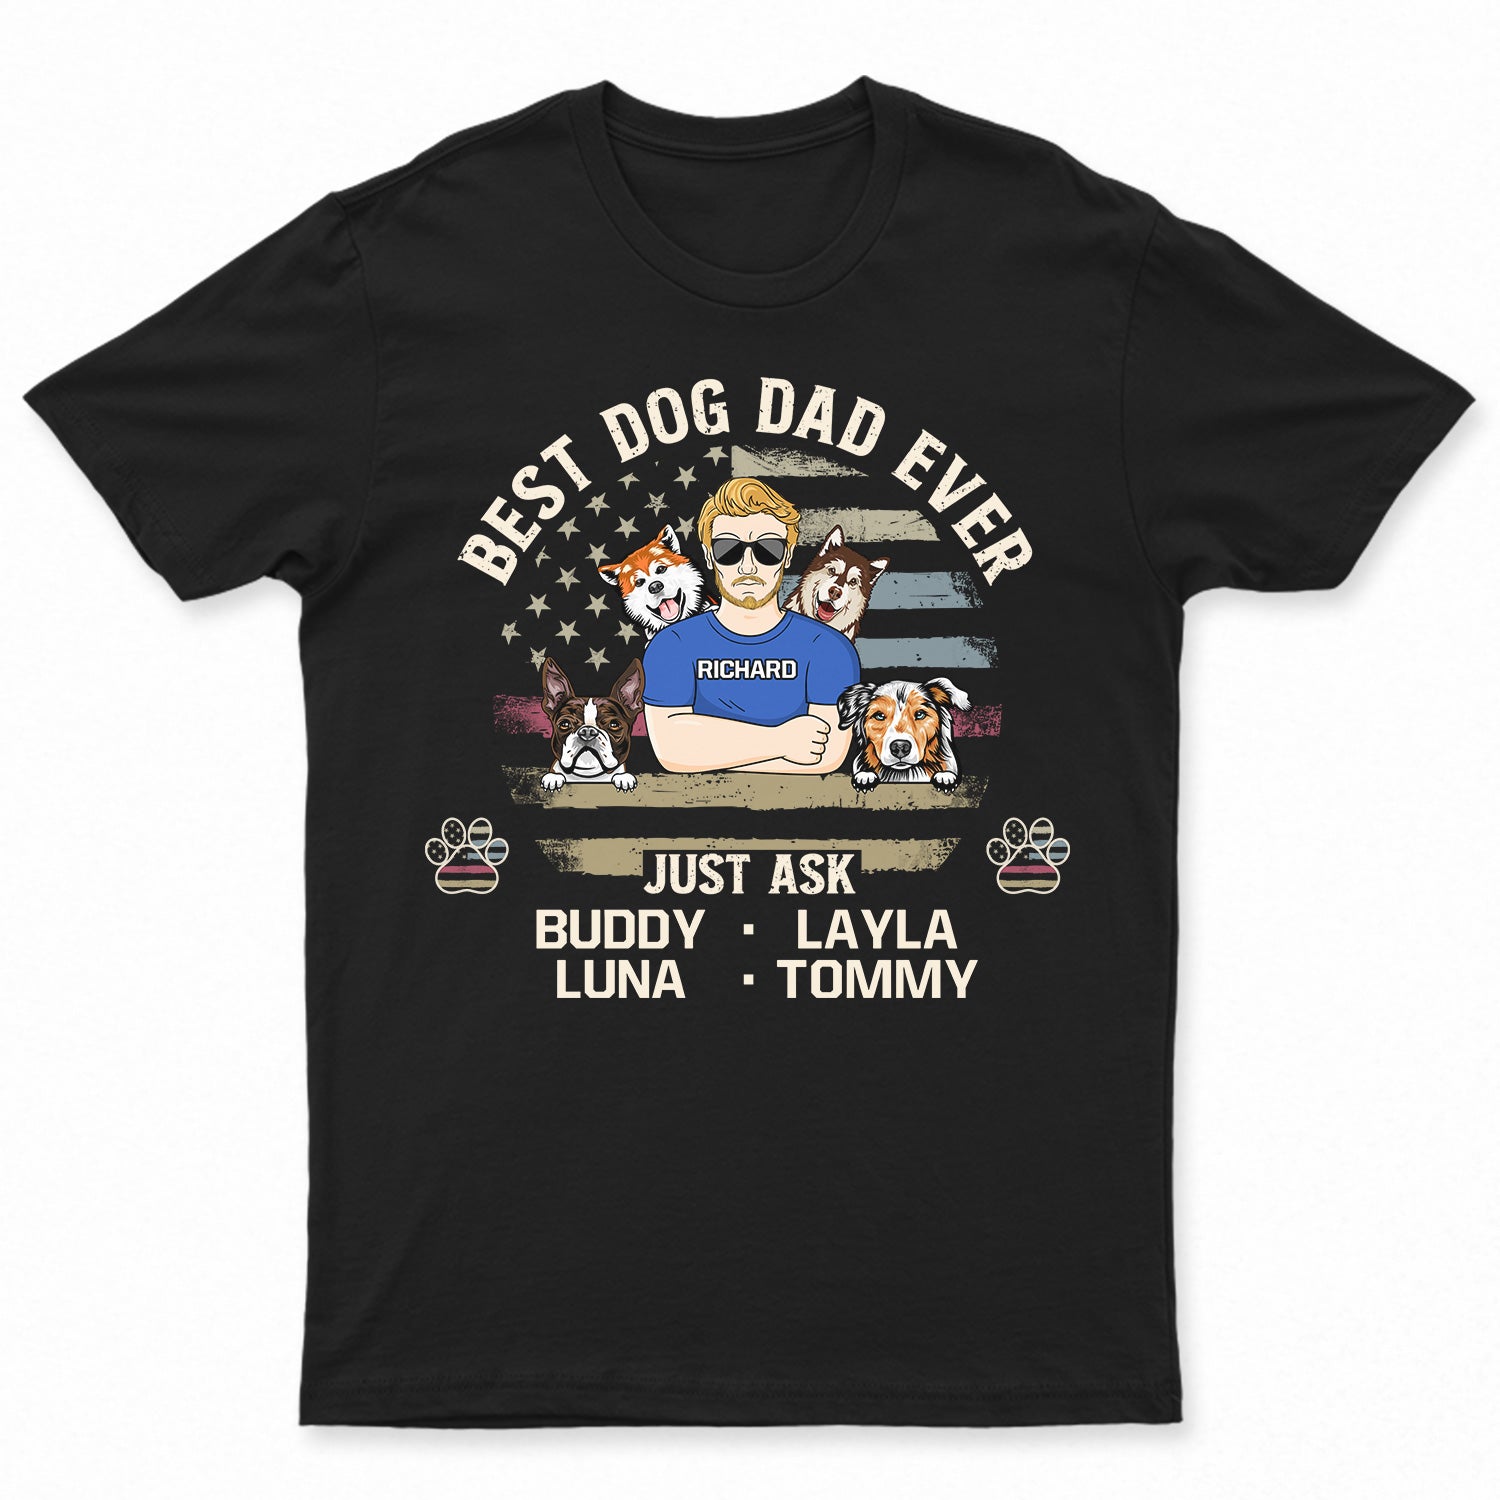 Best Dog Dad Dog Mom Ever - Birthday, Loving Gift For Daddy, Father, Mother, Pet Lovers - Personalized Custom T Shirt